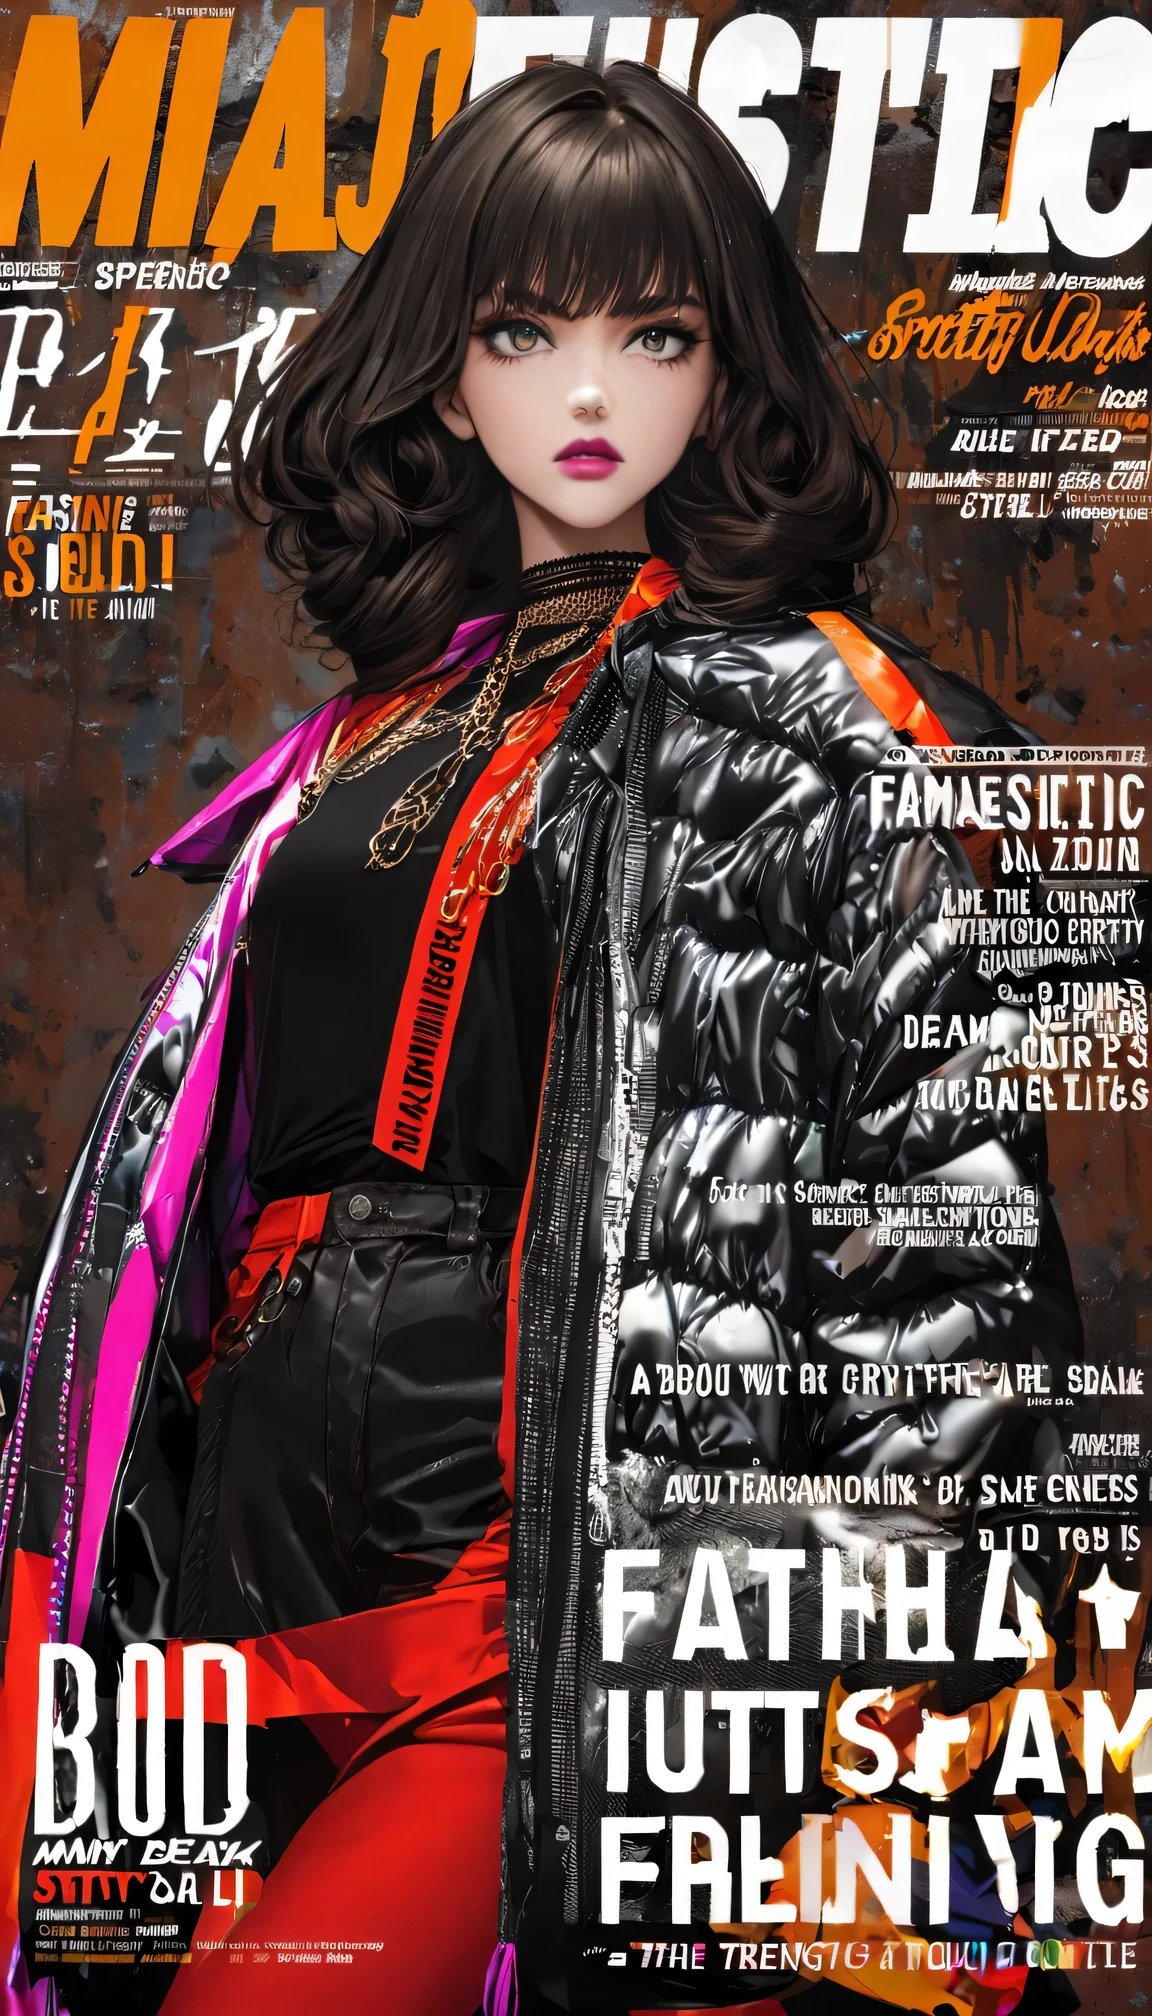 Fashion Magazine cover：A handsome female model, ((((dramatic))), (((Gritty))), (((intense))) film poster featuring a young miss as the central character. She stands confidently in the center of the poster, wearing a fashionable and edgy Full set of equipment, with a determined Express on her face. The background is dark and Gritty, with a sense of danger and intensity. The text is big胆的 and striking, with a catchy tagline that adds to the overall feeling of drama and excitement. The color palette is mainly dark with splashes of Full of energy colors, giving the poster a Dynamic and visually striking appearance,vertical painting (Magazine:1.3), (cover-style:1.3), Fashionable, miss, Full of energy, Full set of equipment, posture, front, colorful, Dynamic, background, element, confident, Express, Keep, statement, Accessories, majestic, coiled, about, touch, Scenes, text, cover, big胆的, striking, title, fashionable, font, catchy, title, big, striking, modern, trend, focus, Fashion,